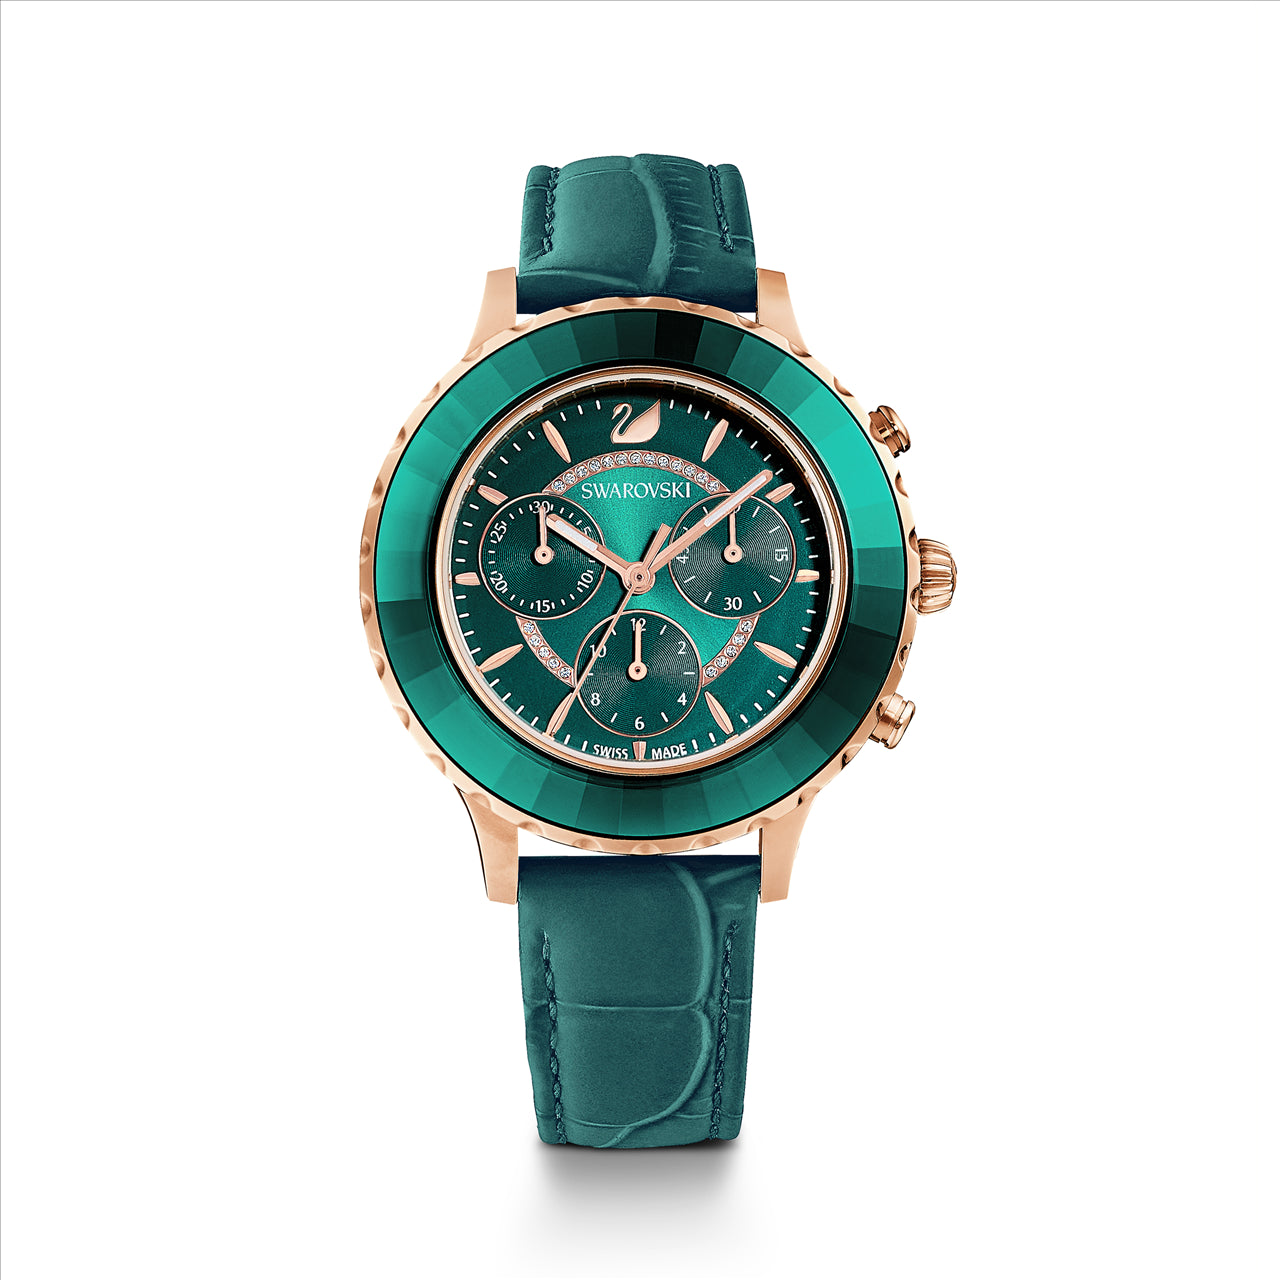 Octea Lux Chrono watch, Swiss Made, Leather strap, Green, Rose gold-tone finish